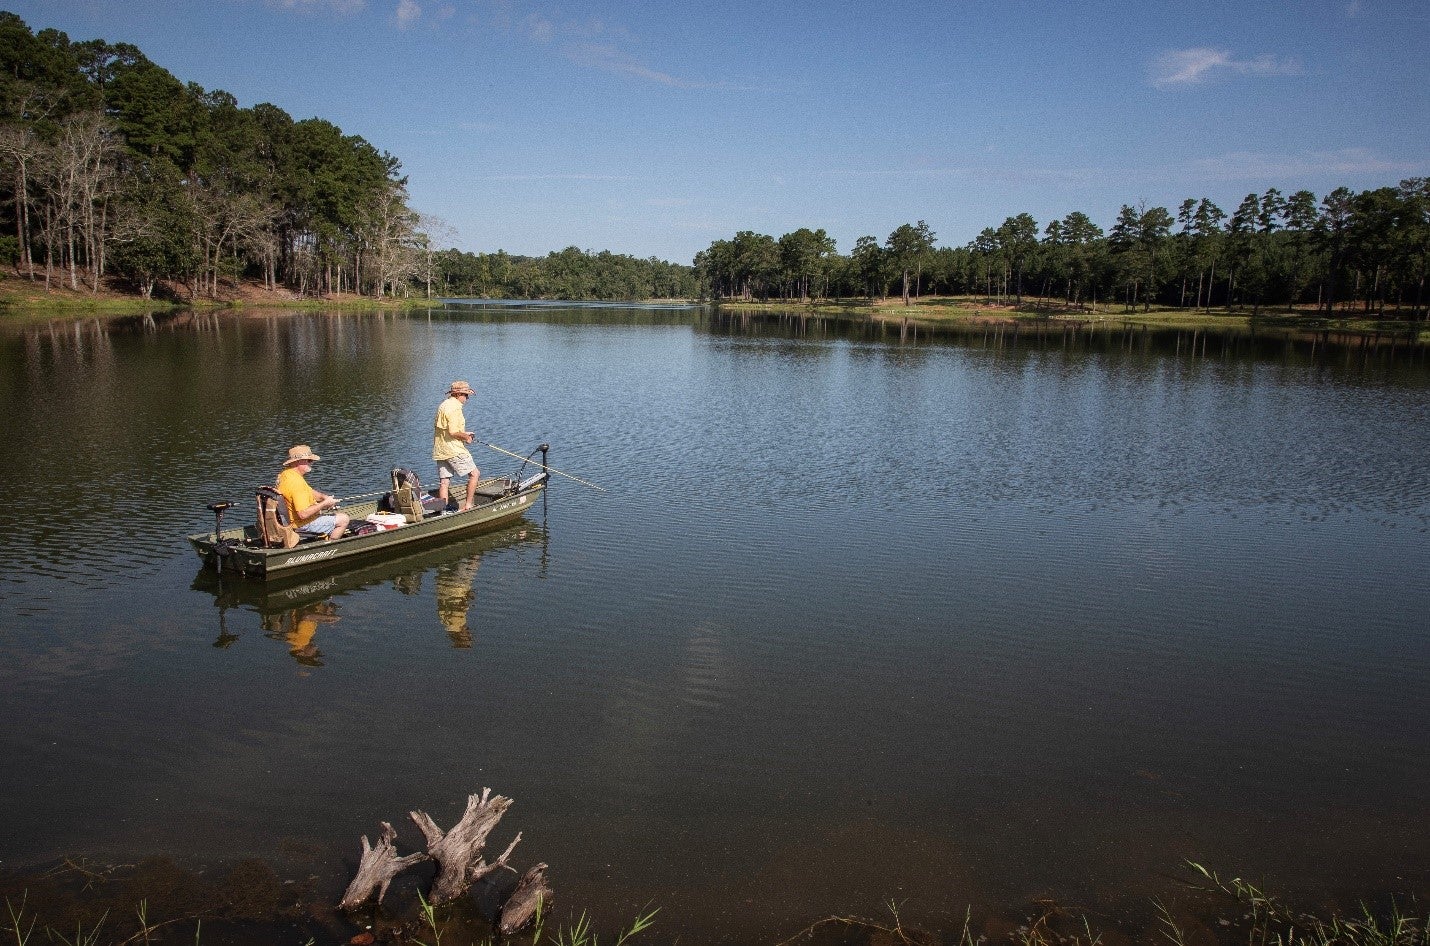 Boating and fishing are fun, stress-relieving activities that can be enjoyed with family and friends year-round. From connecting with loved ones to de-stressing after a busy week, boating and fishing help to maintain a healthy lifestyle.